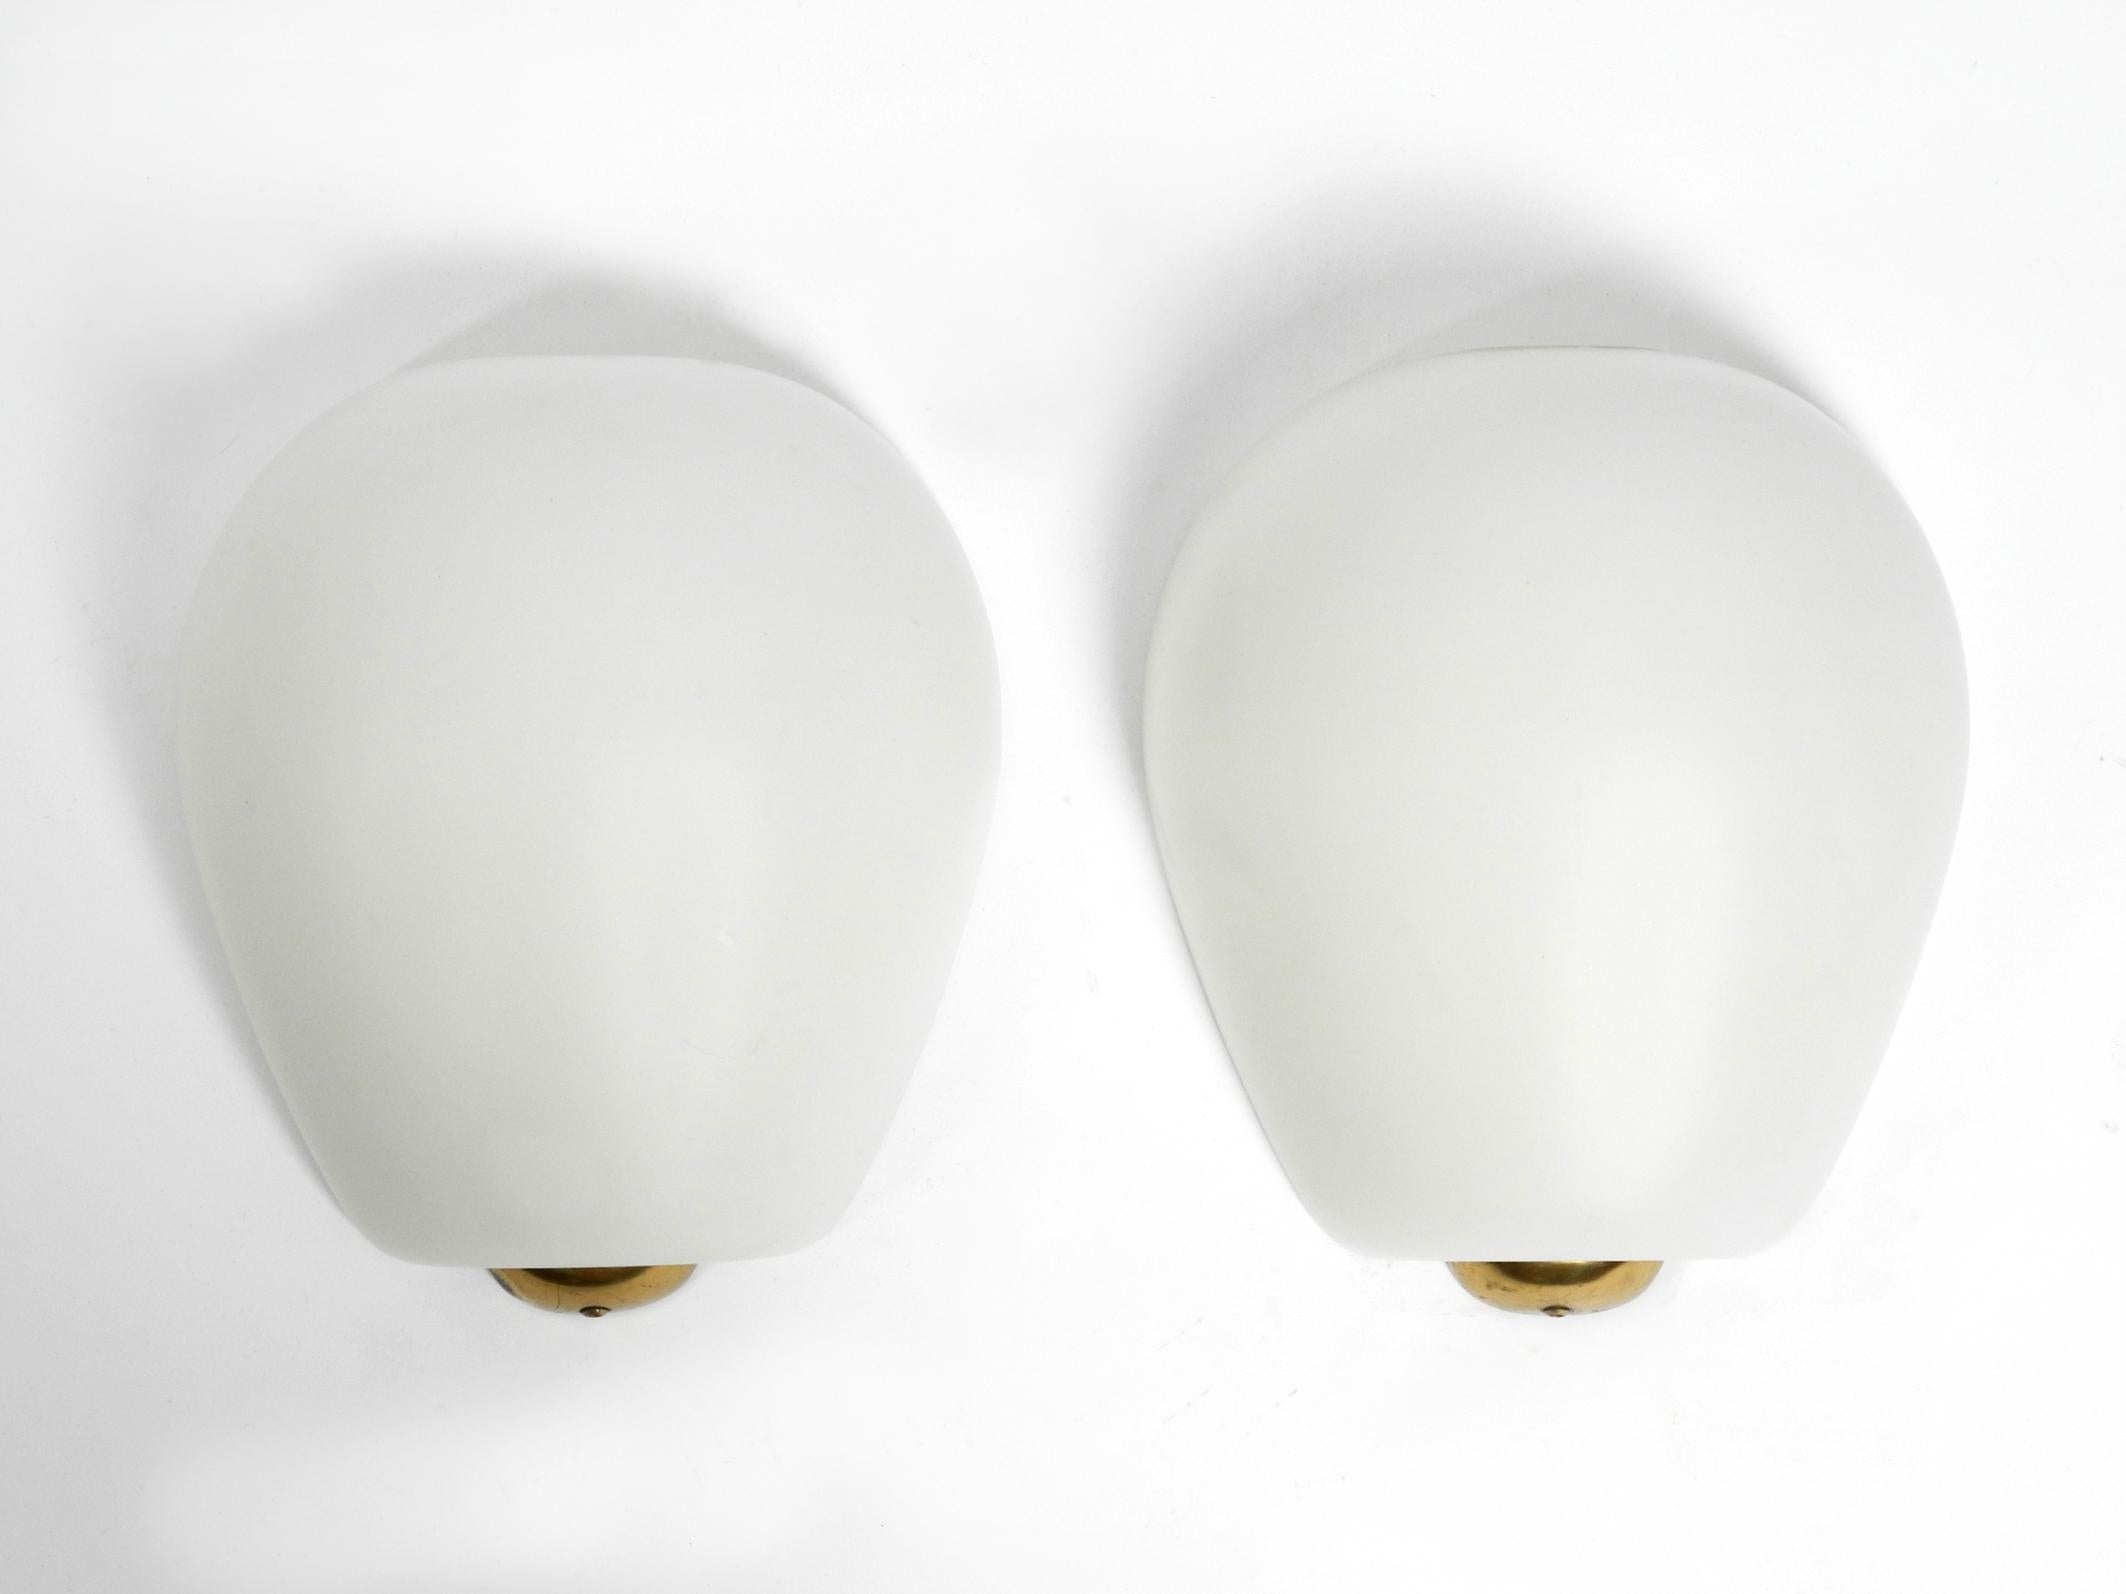 Pair of elegant very rare large Mid-Century Modern glass 'shell' wall lights by Wilhelm Wagenfeld. Manufactured by Peill & Putzler in the 1950s. Very rare in this large version.
Glass shade is made of a special flashed glass in matt white with